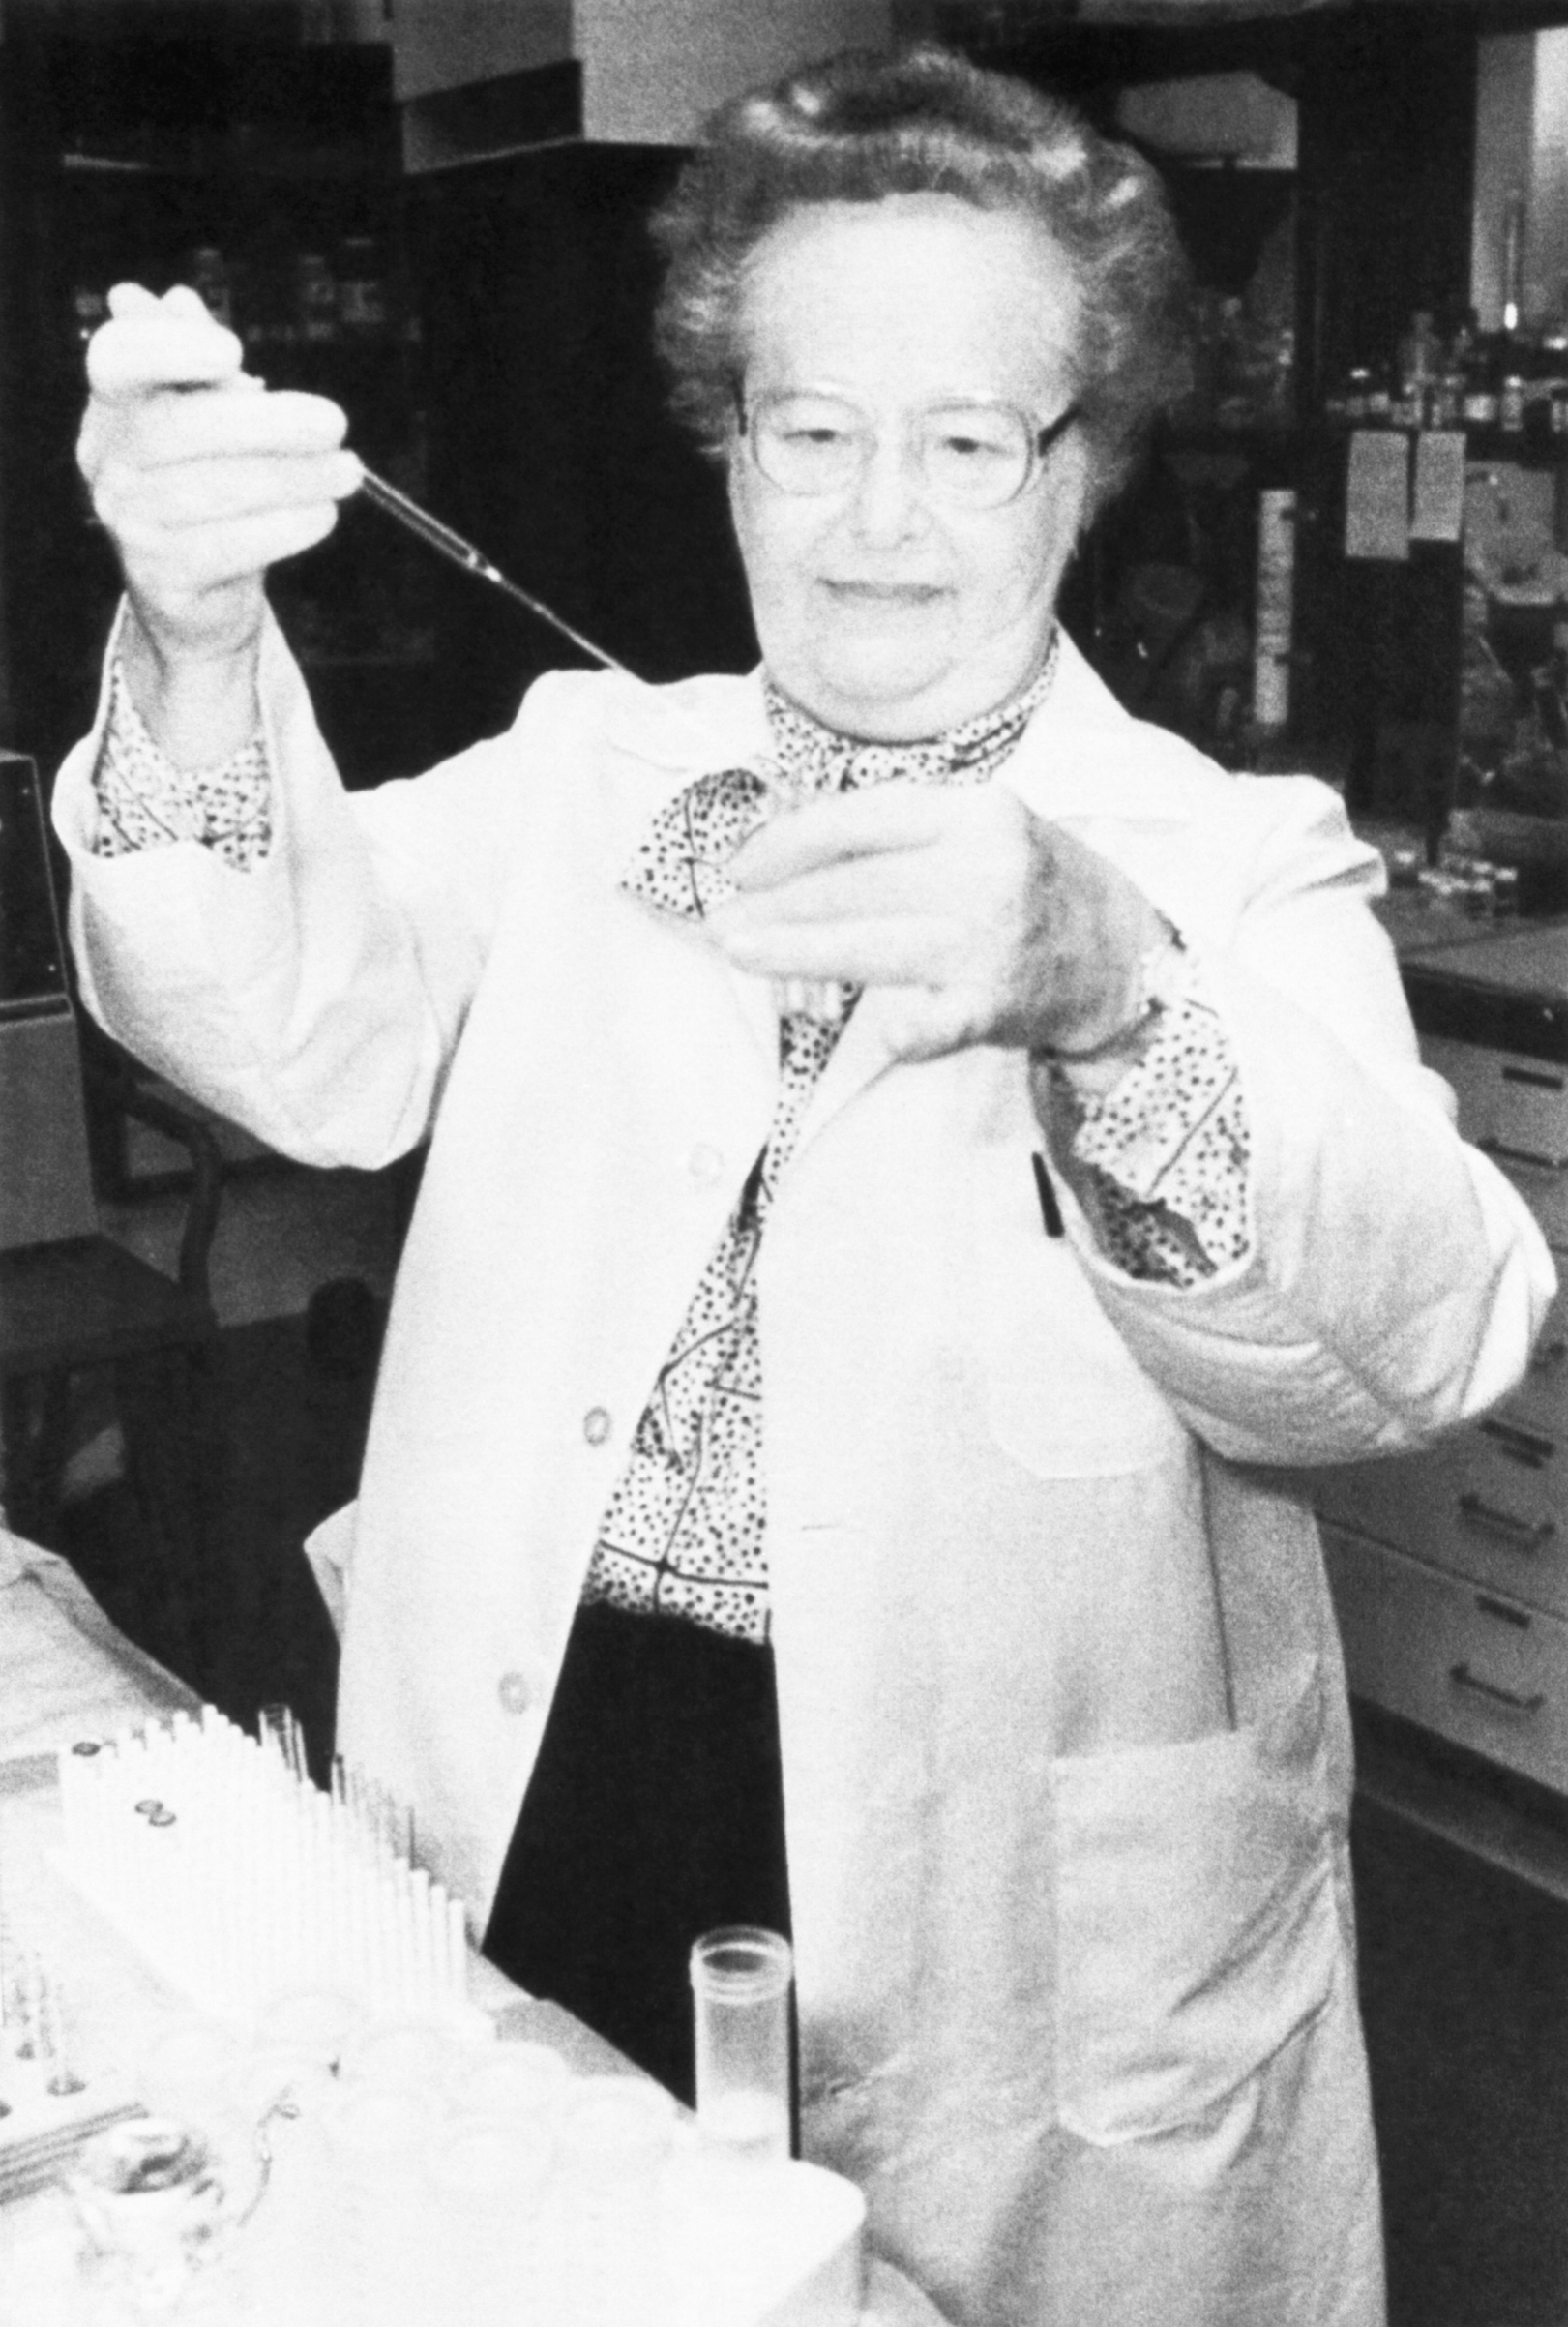 Burroughs Wellcome researcher Gertrude Elion was back at work in the lab after being named a Nobel Prize winner in Medicine in 1988. Elion and coworker George Hitchings were chosen for the honor for their work in developing drugs to treat leukemia and AIDS. (Bettmann / Getty Images)